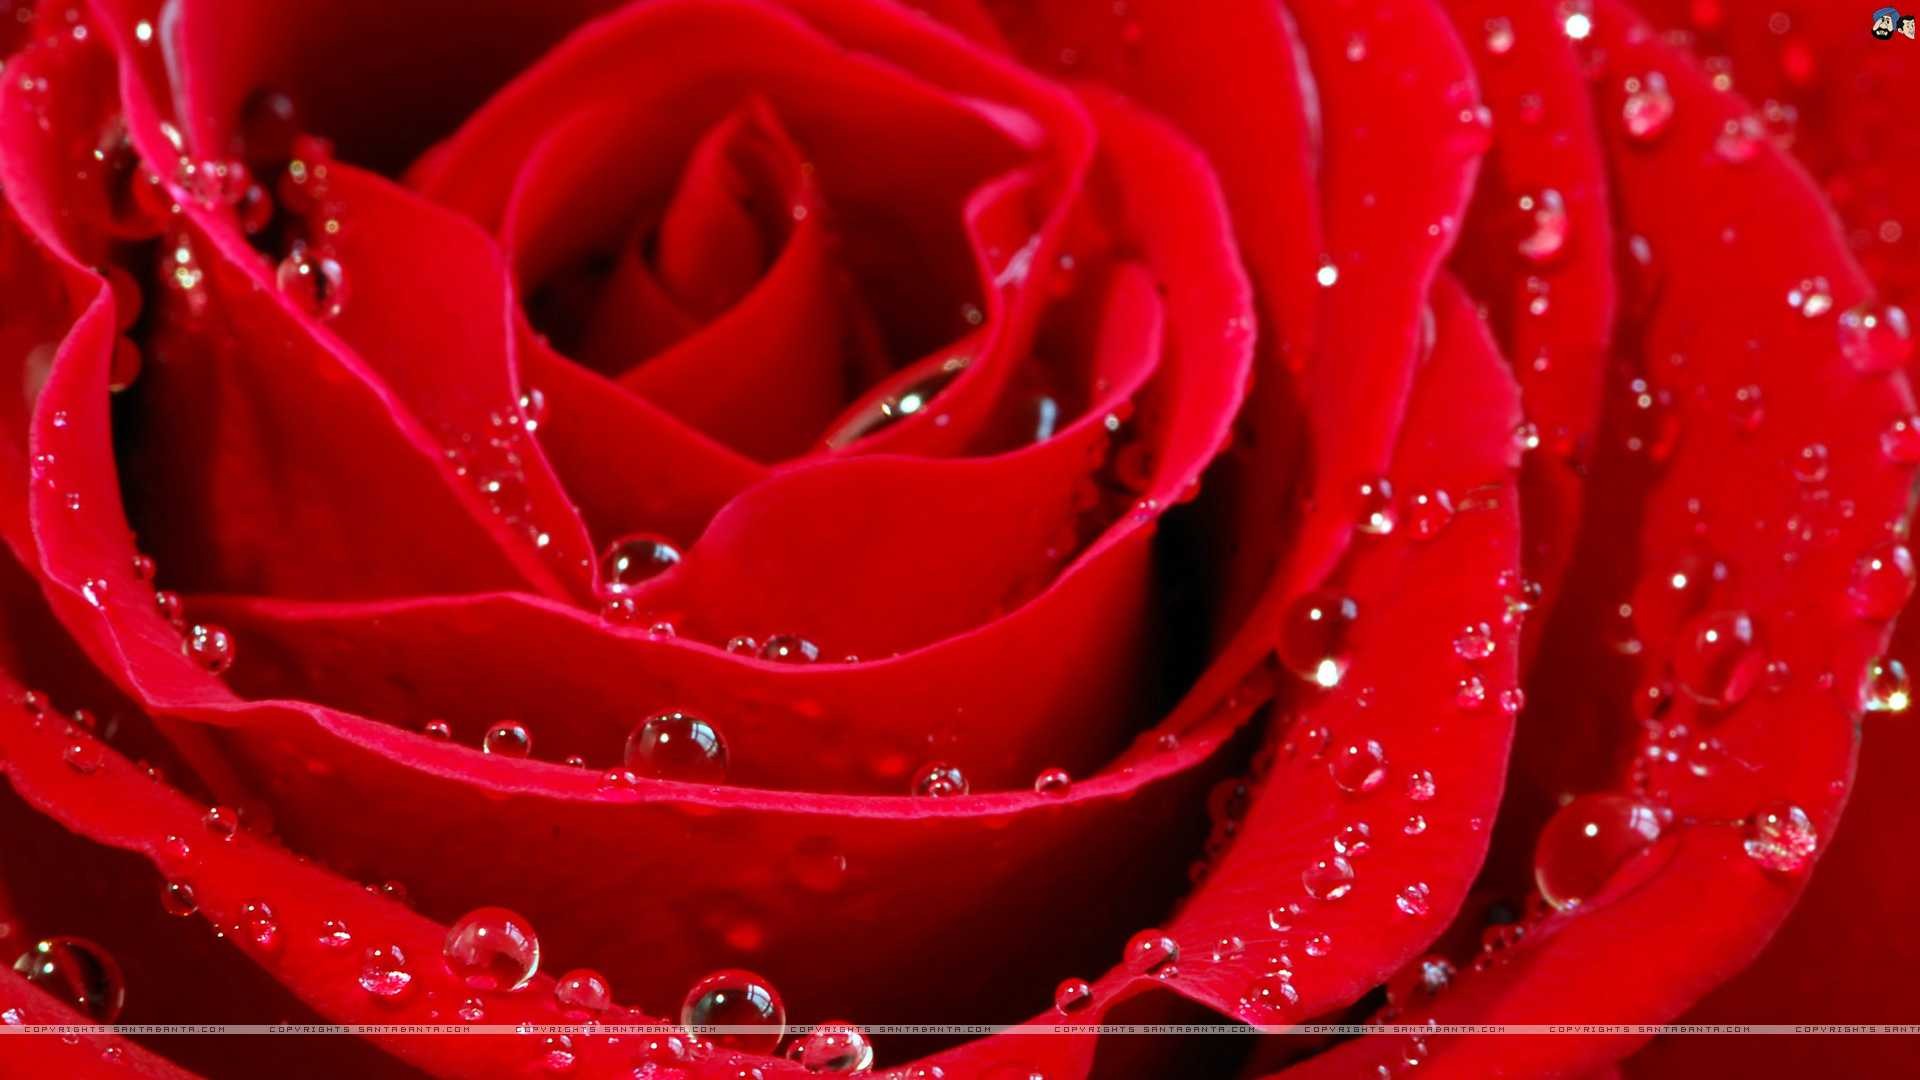 1920x1080, Photos For Red Rose Wallpaper 3d High Resolution - Red Rose  Flowers Wallpapers Free Download - 1920x1080 Wallpaper 